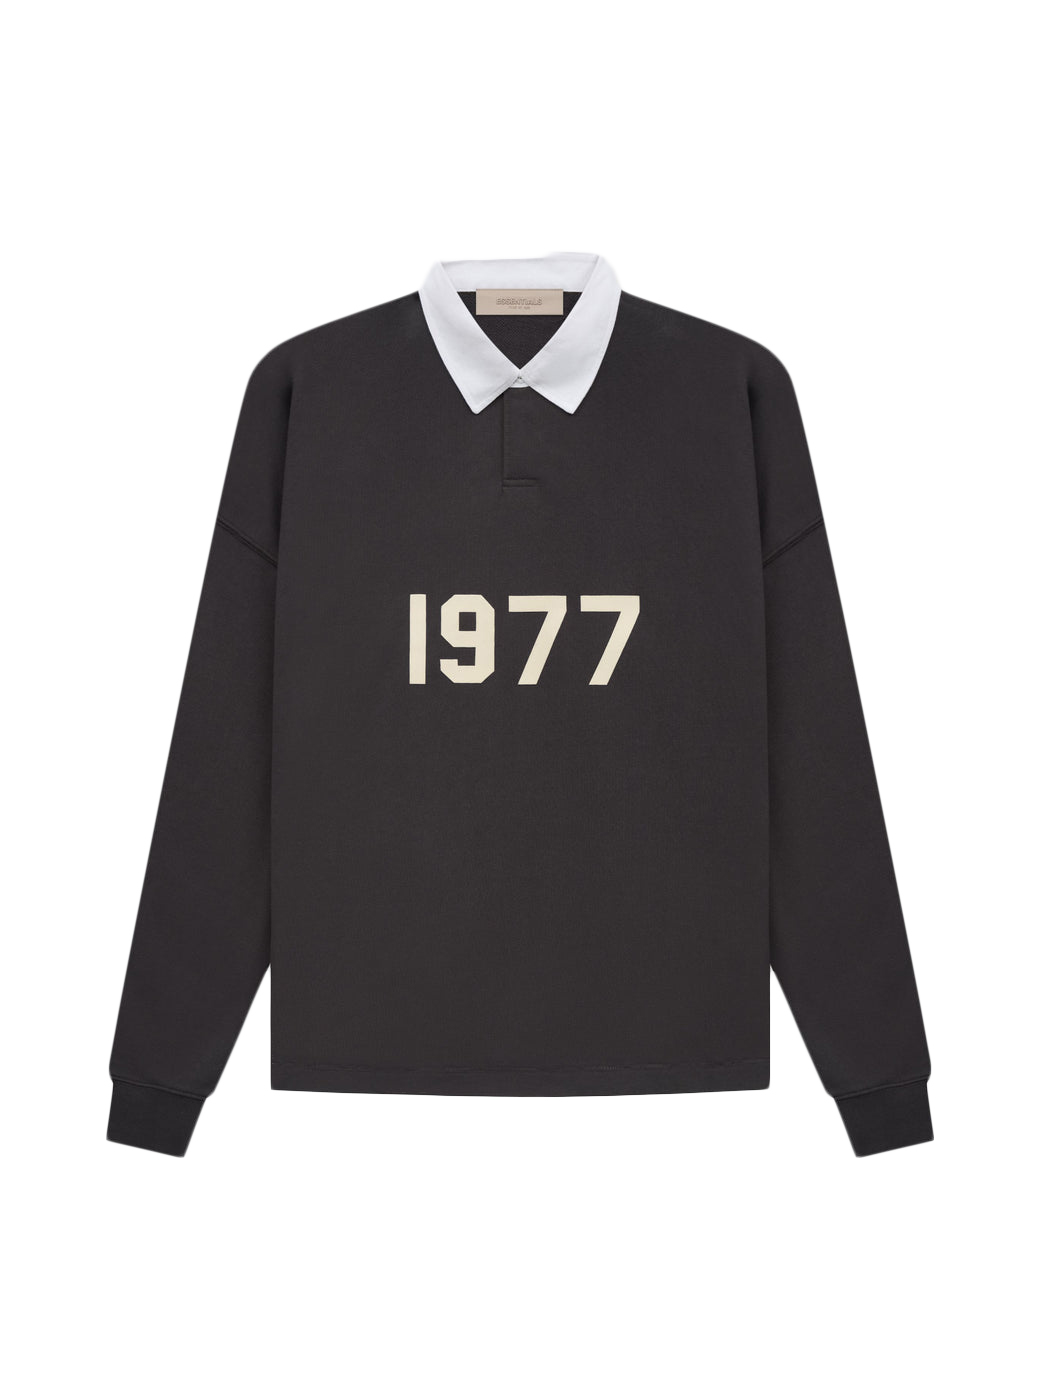 Fear of God Essentials 1977 Rugby Iron - SS22 - US